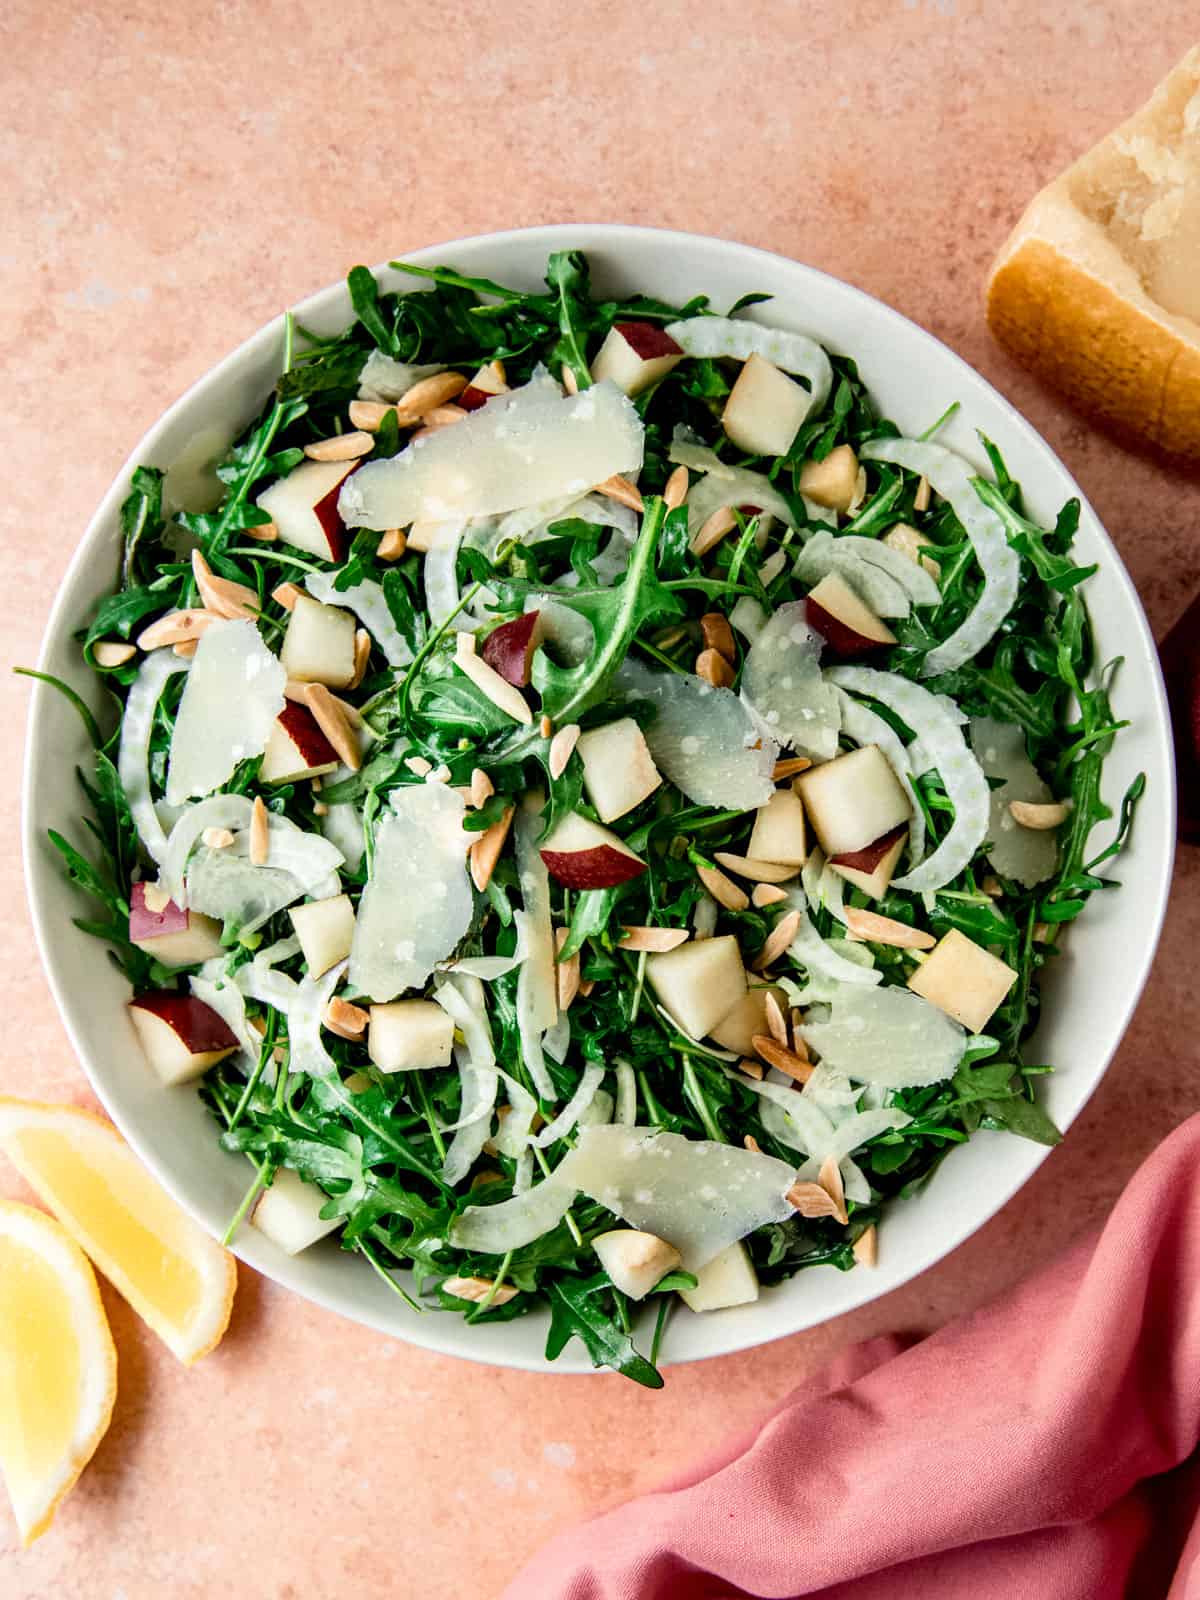 Arugula and pear salad with sliced fennel and shaved parmesan.